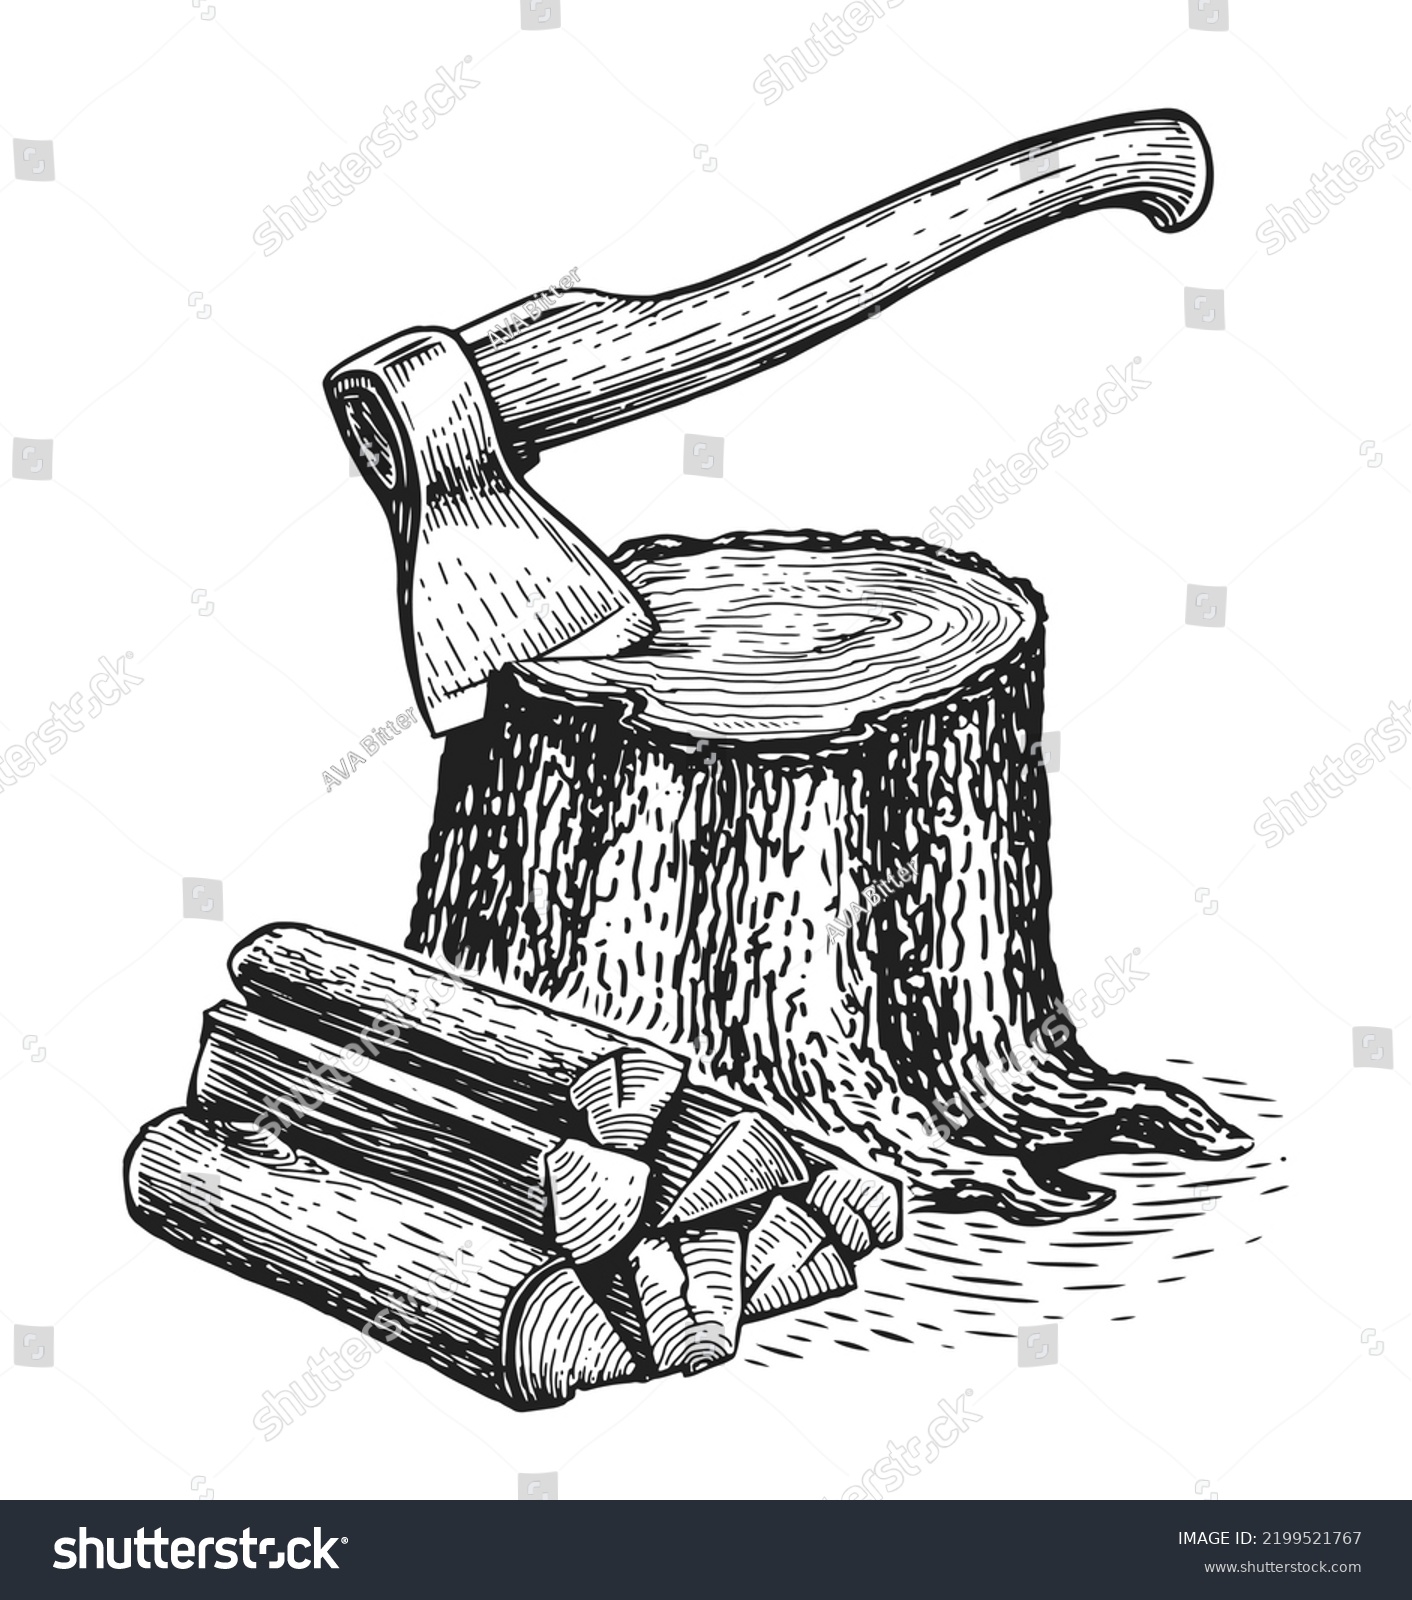 Ax sticks out in tree stump and firewoods. Wooden logs and timber. Natural lumber, carpentry materials set. Woodworking #2199521767